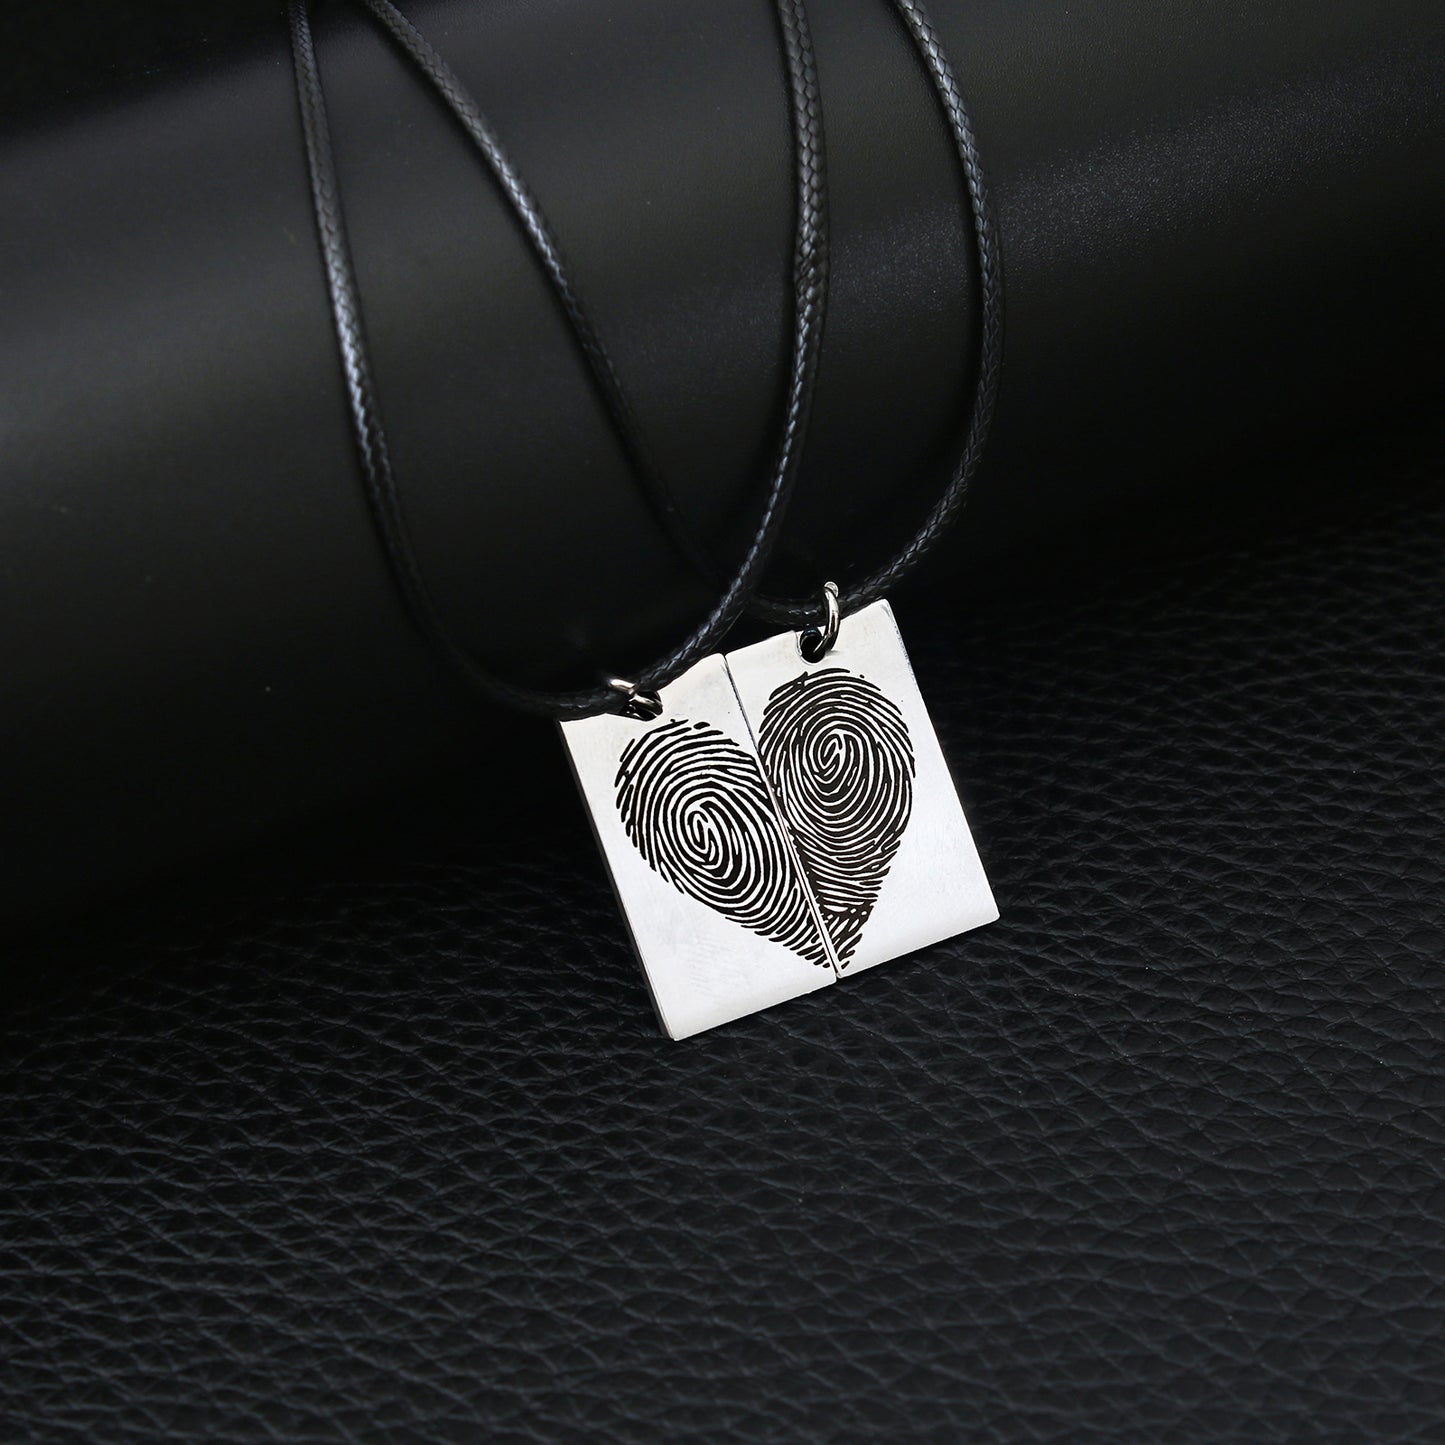 Heart Square Necklace For Men And Women